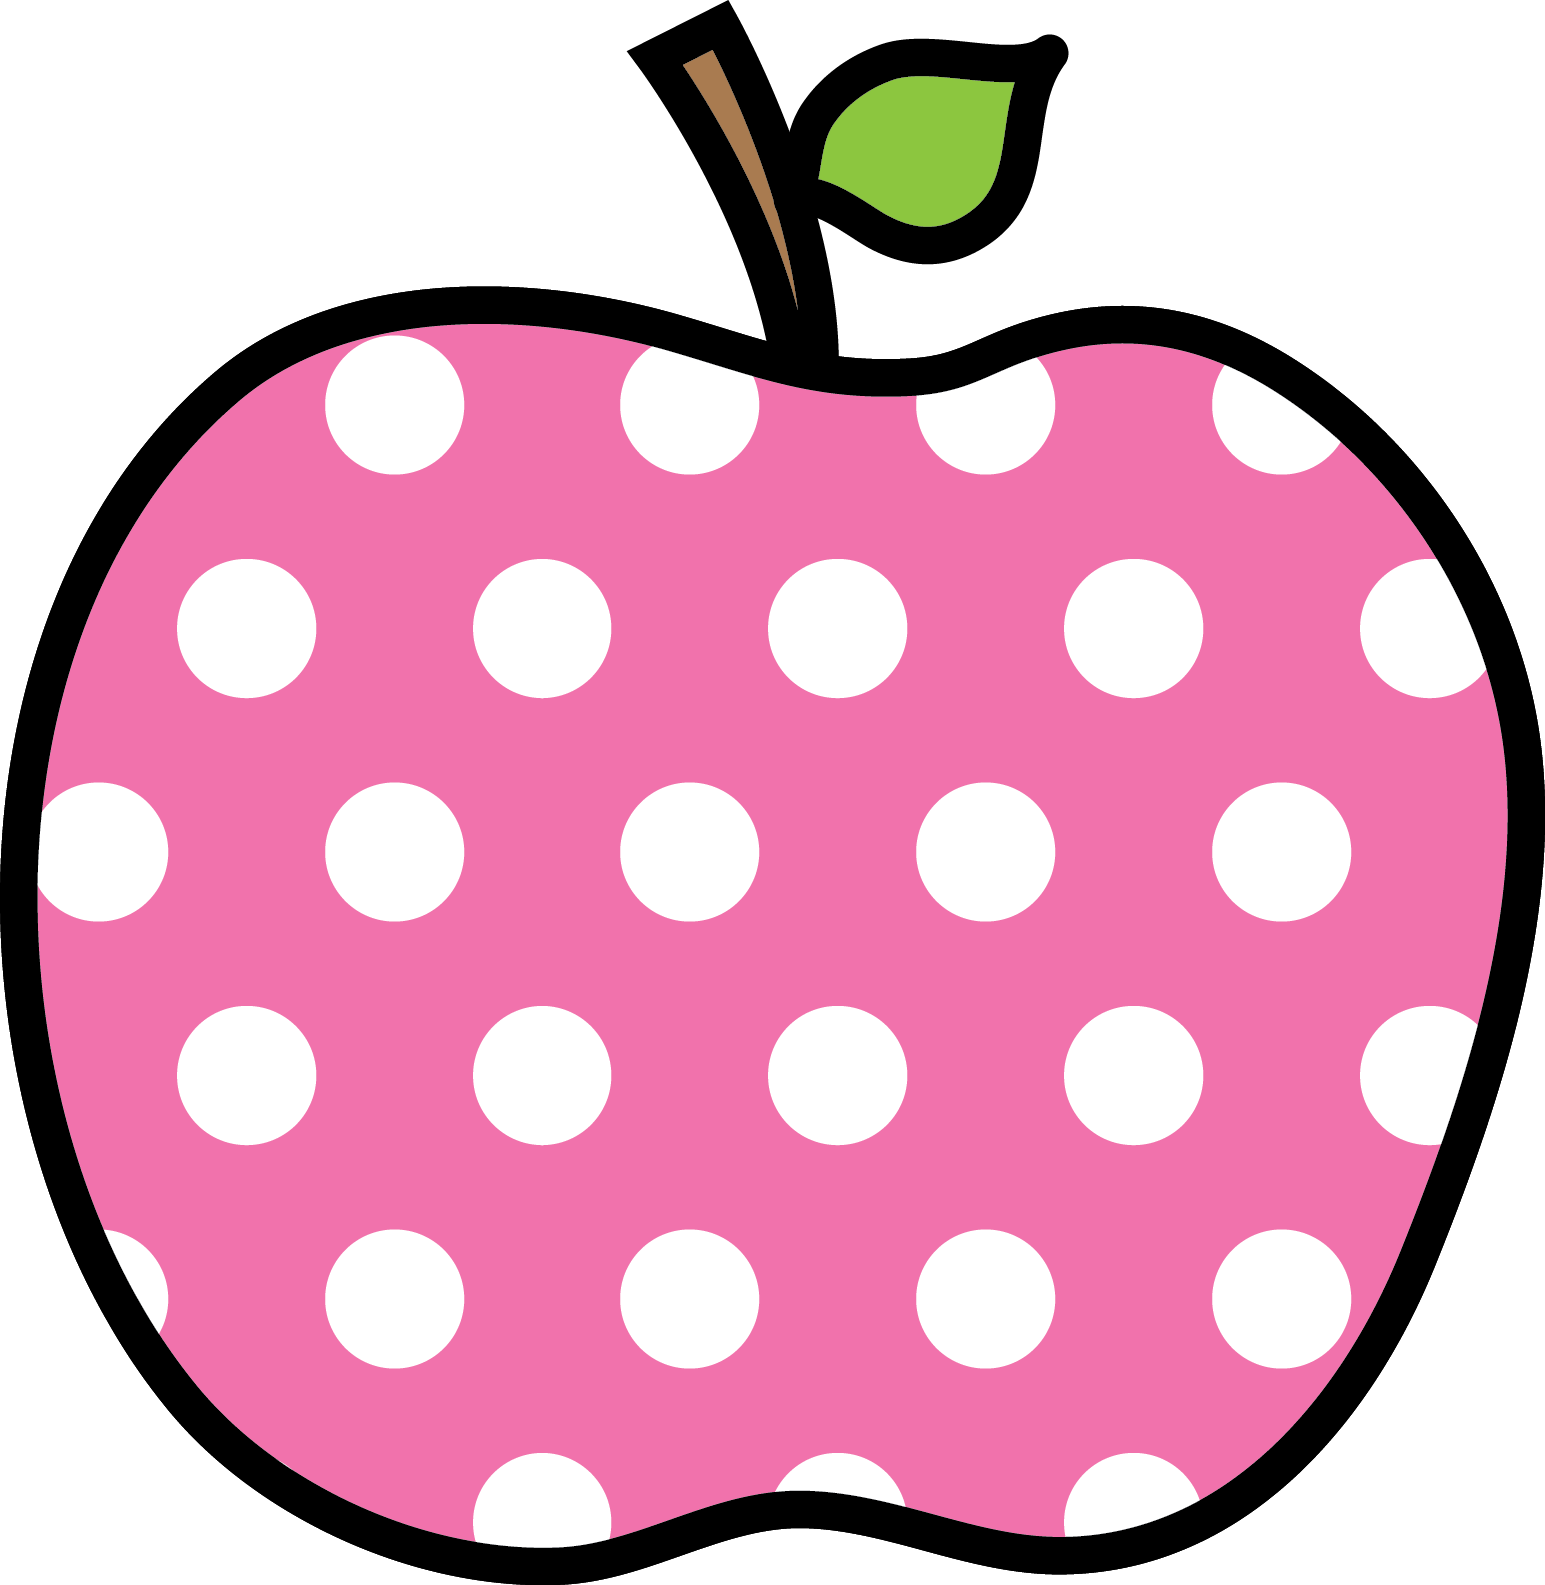 Witch clipart apple. Polka dot encode to